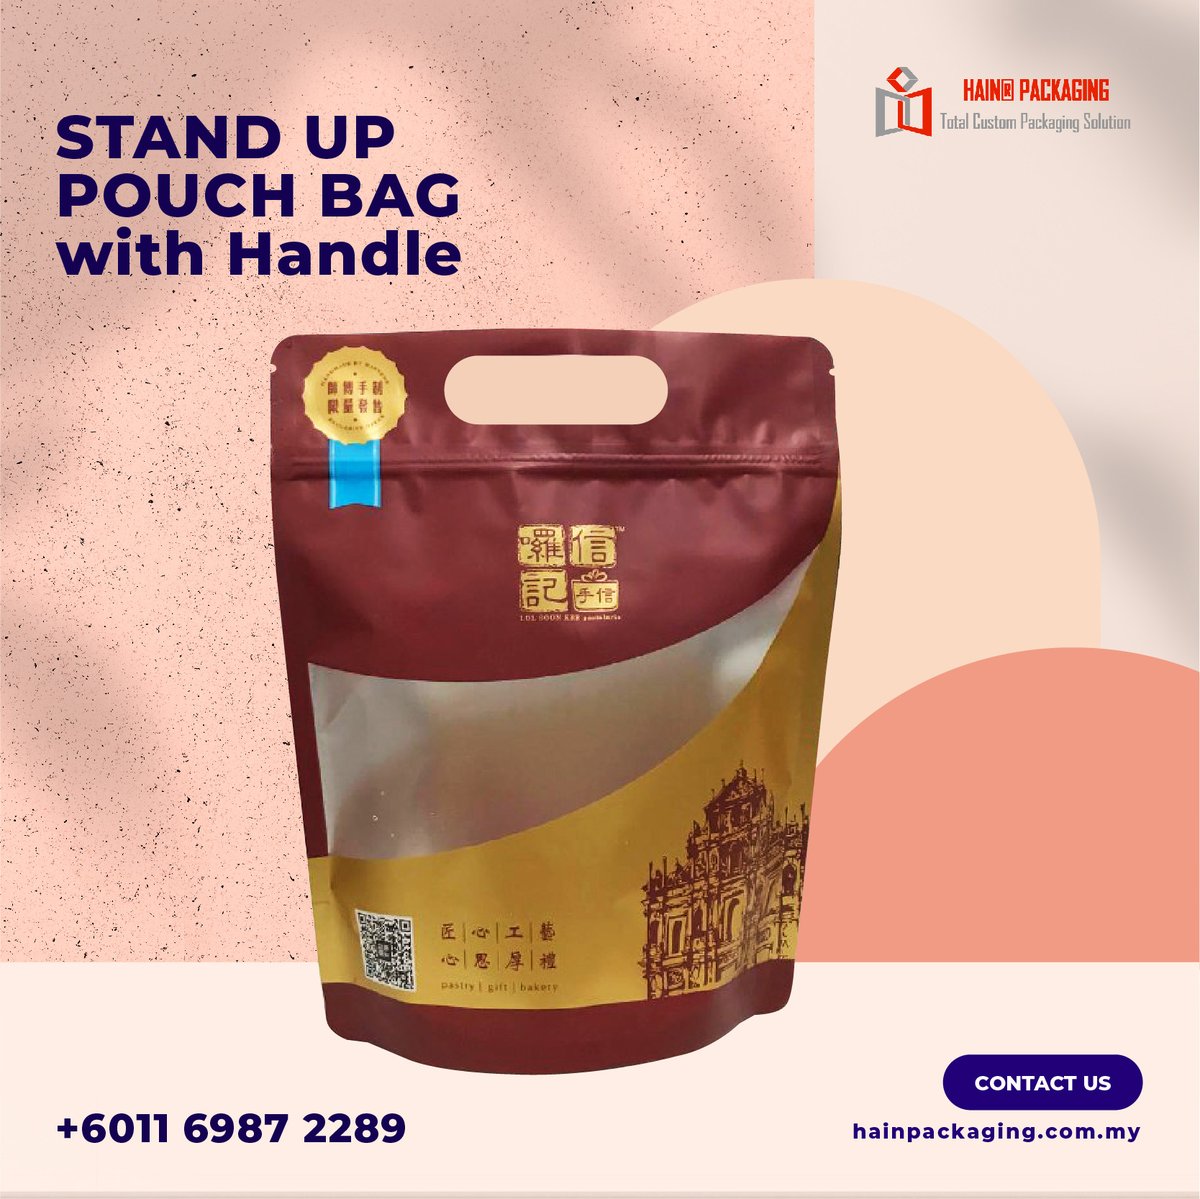 Bake up a storm and have your bread in unique, eye-catching custom printed plastic bags that suit your brand image! Come talk to us to find out more!

wa.me/601169872289
#breadbags #customprintedbreadbags #custombreadbags #breadpackaging #packagingdesign